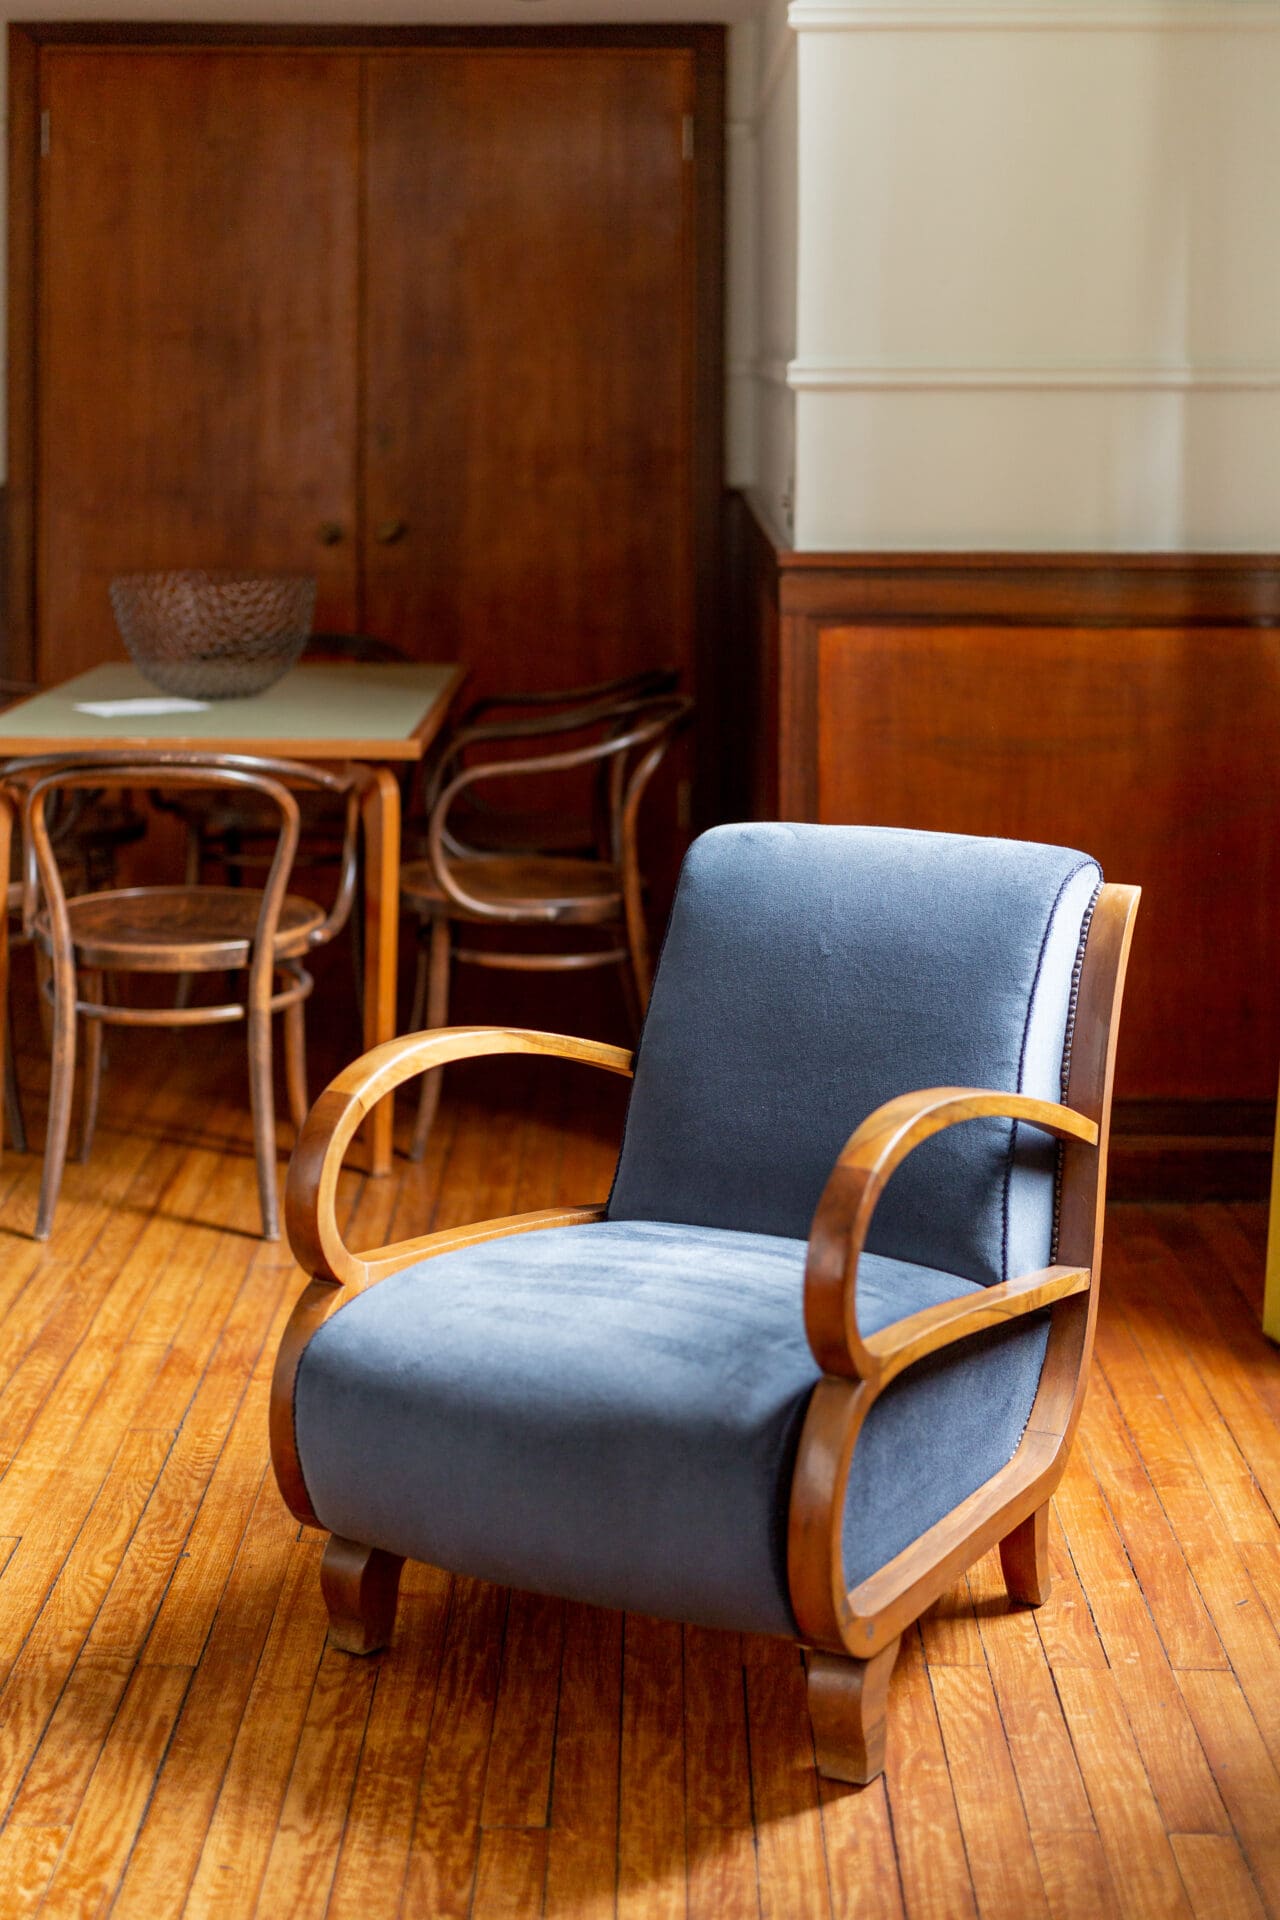 Best hotels London | A midcentury modern armchair with blue upholstery and wooden arms at the Town Hall Hotel in Bethnal green